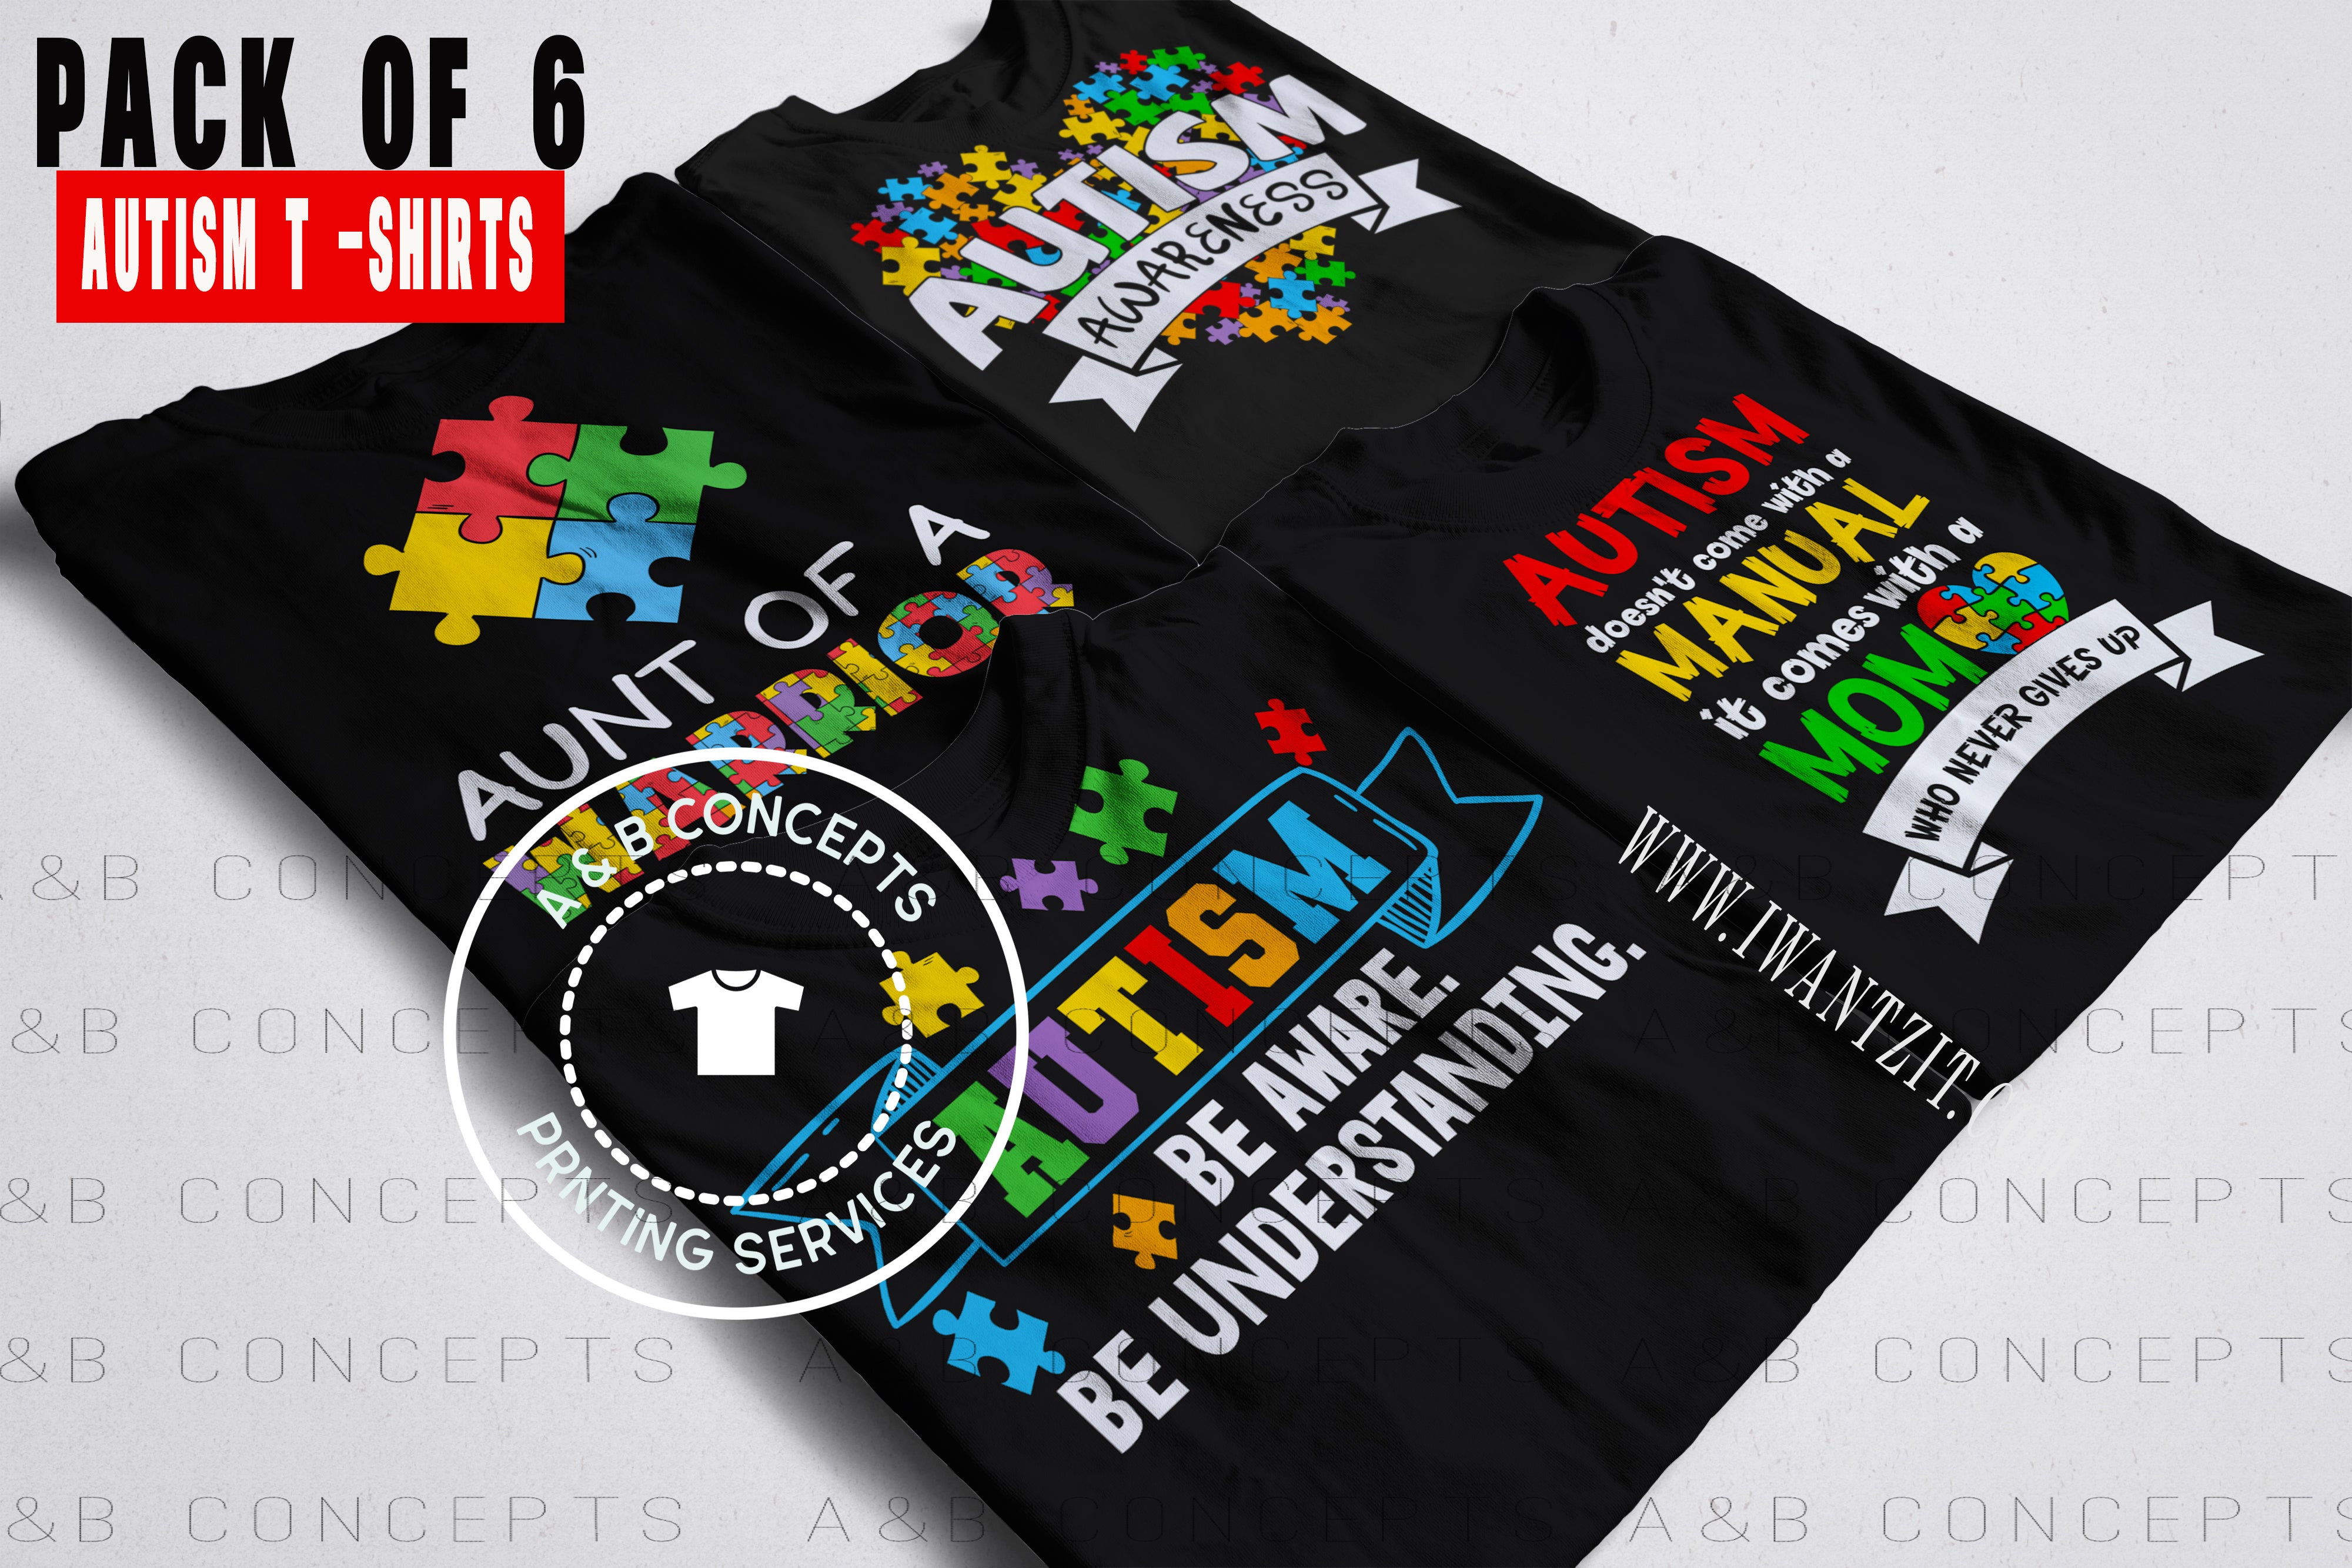 Support Autism T-shirt Pack of 6 Black T-shirts 100% Cotton Autism T-shirts (Pack Of 6) t-shirt A & B Concepts Medium  